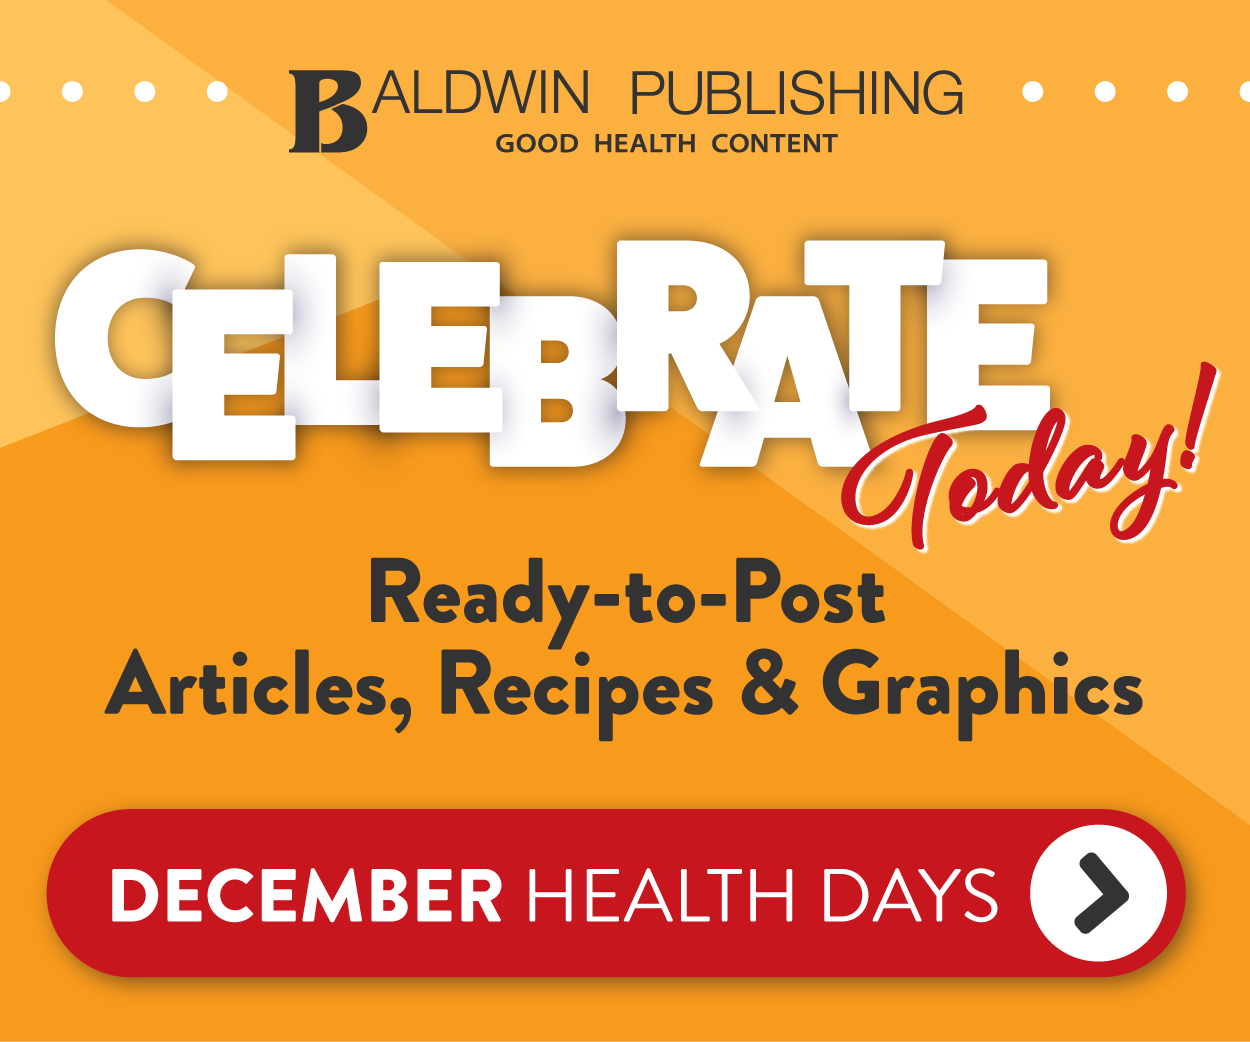 Baldwin Publishing - Celebrate Today, See All December Health Days